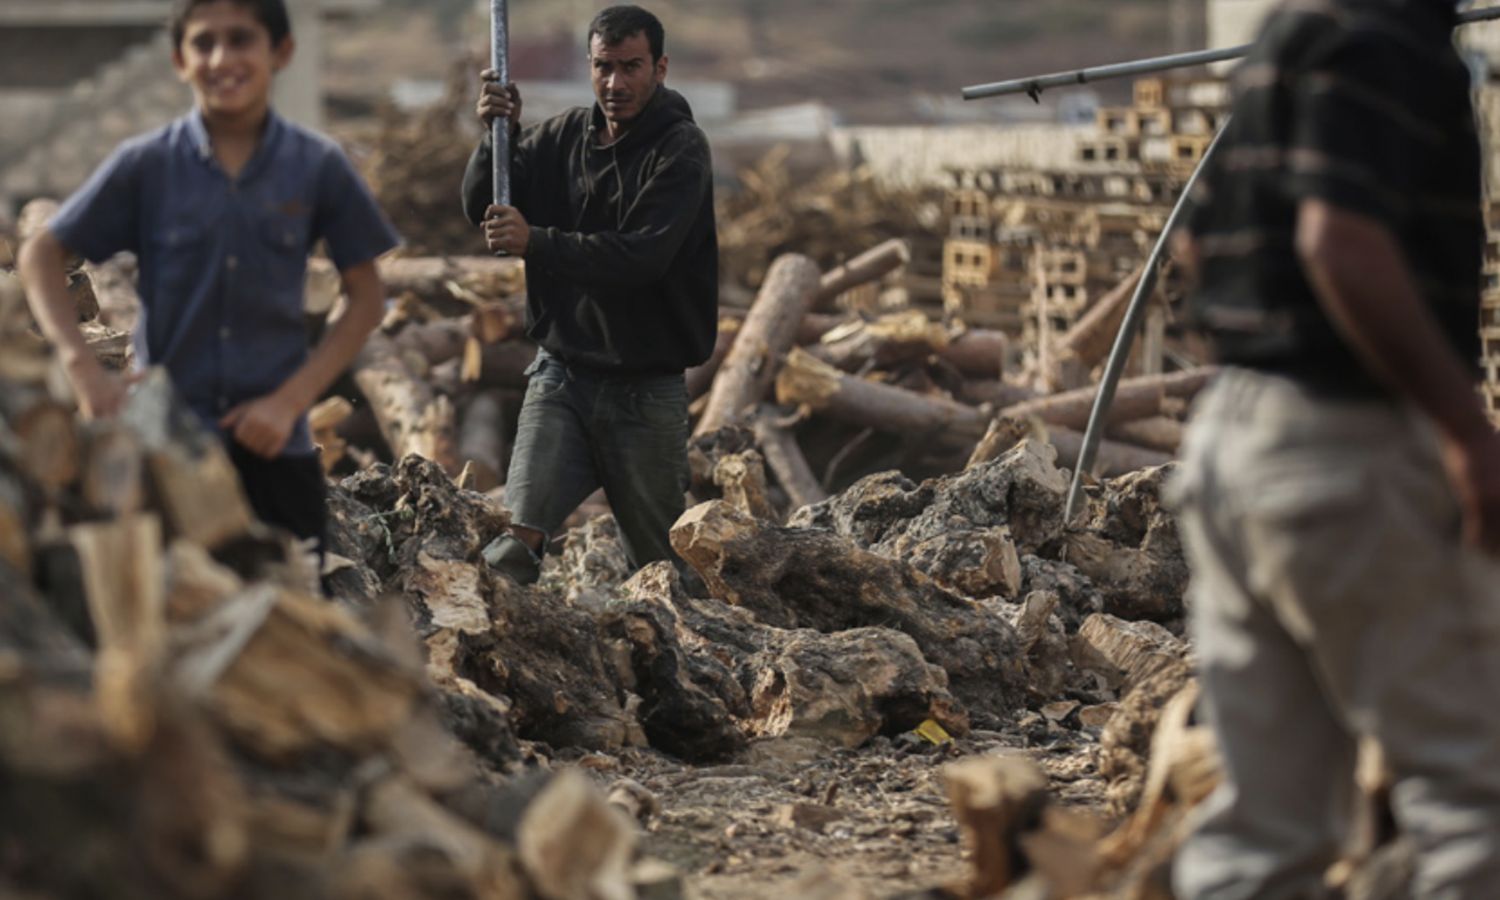 Syrian men cut pieces of wood to serve as a source of warmth during winter - November 3, 2020, Syria (PAX)